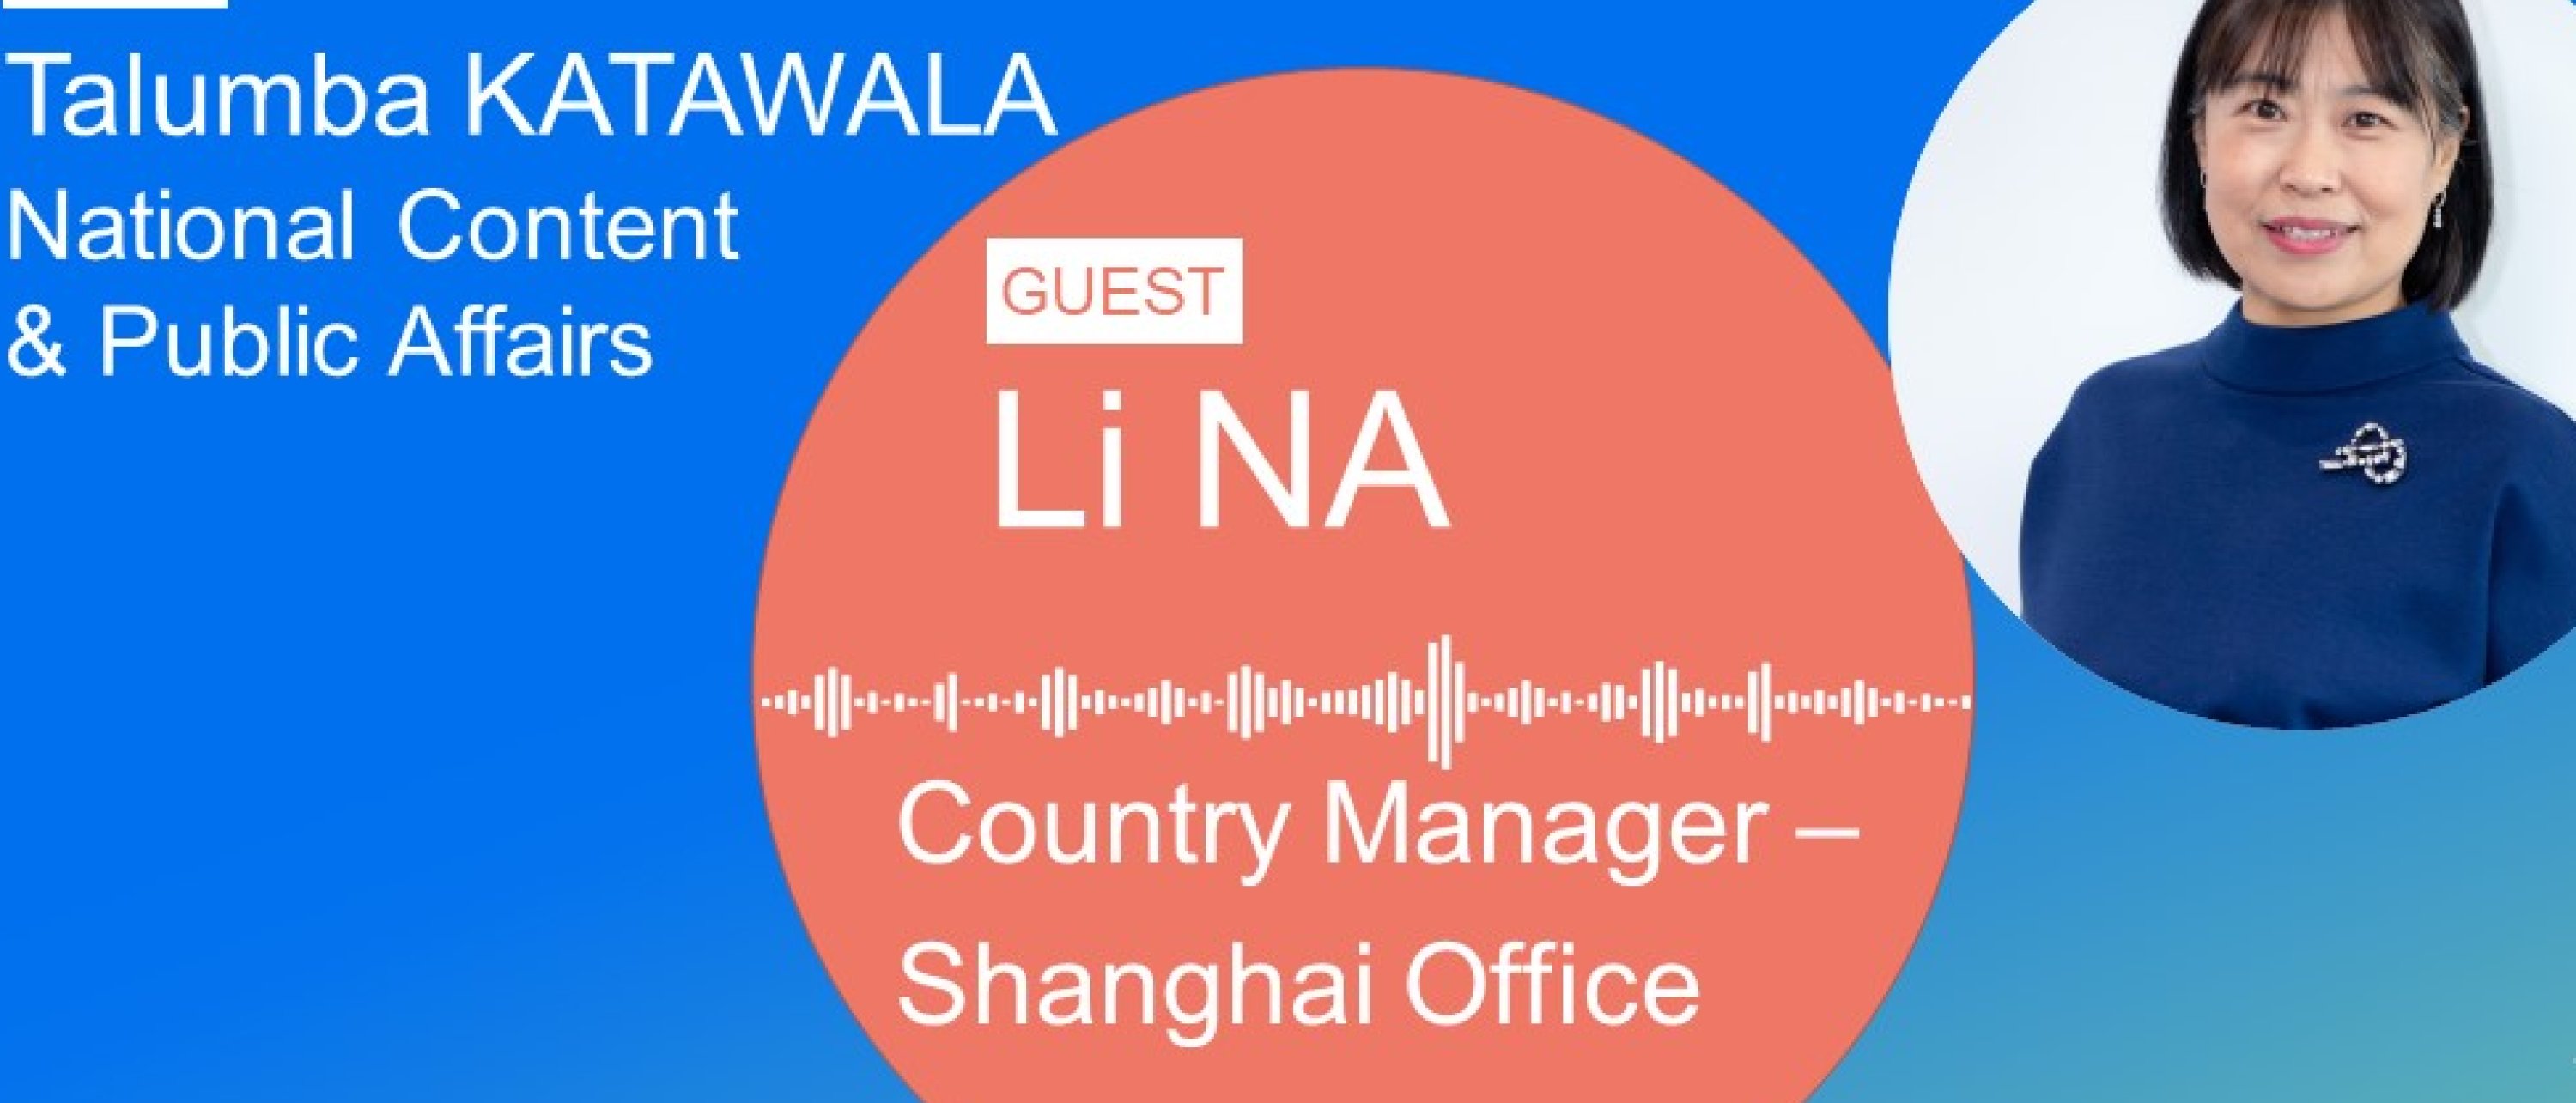 Li Na, Country Manager, China Operating Center, Technip Energies